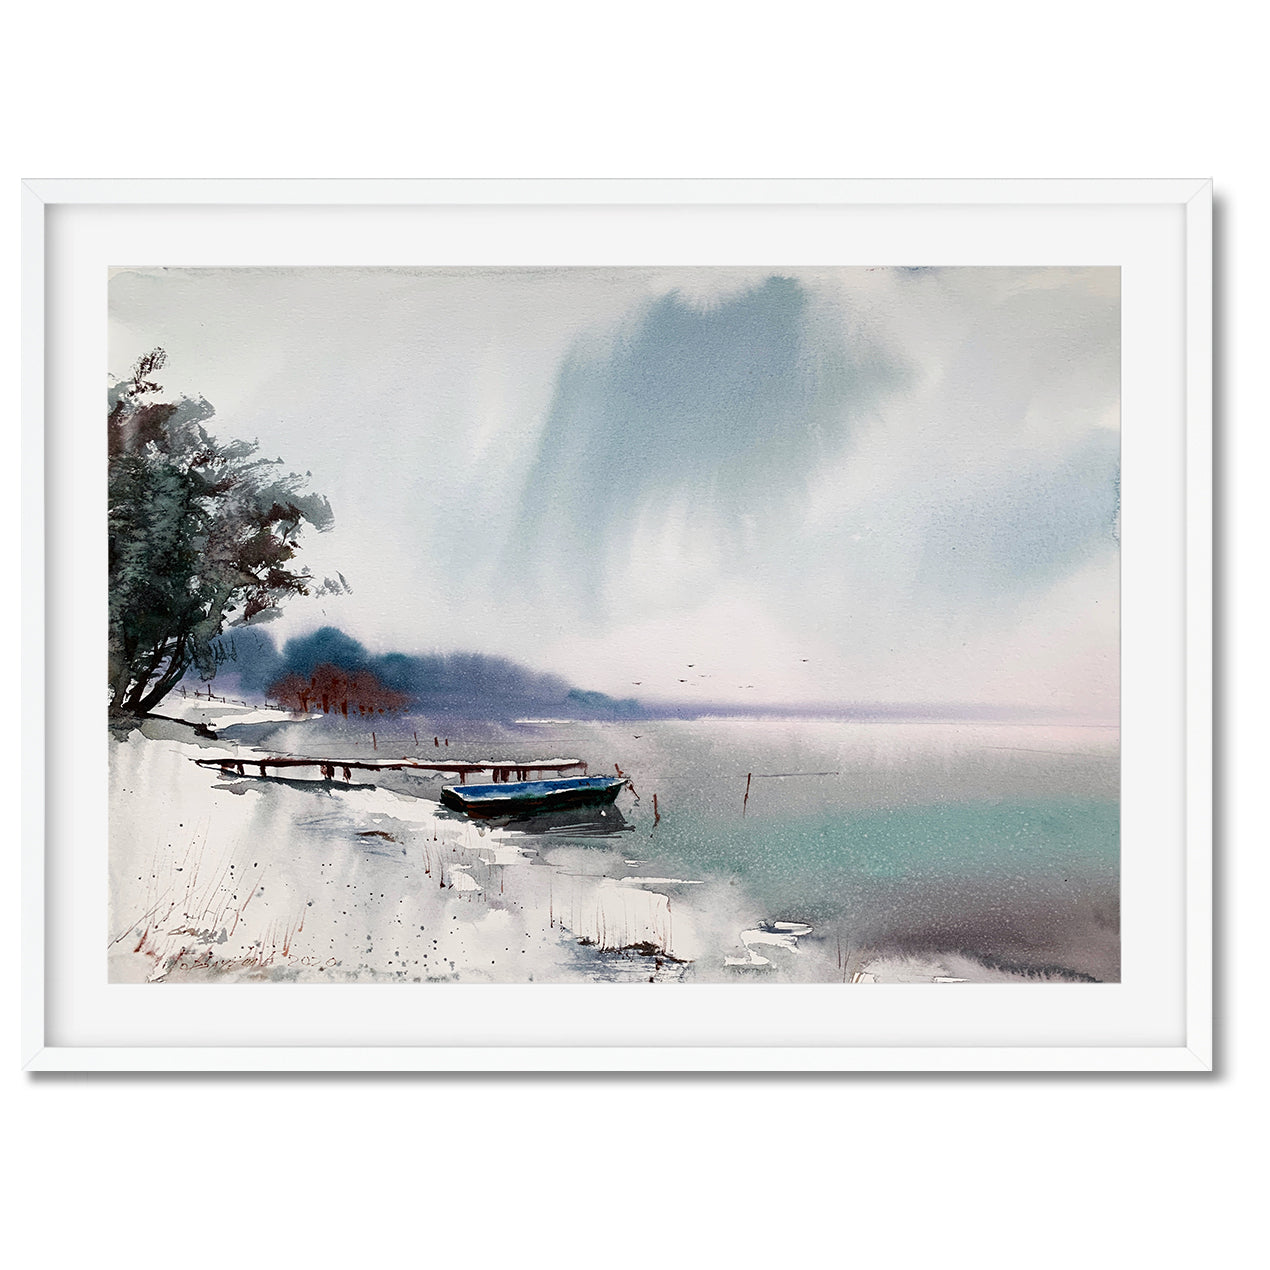 Lake Boat Painting Watercolor Original, Snow Landscape Wall Art, Nature House Wall Decor, Grey, Turquoise, Trees, Pier